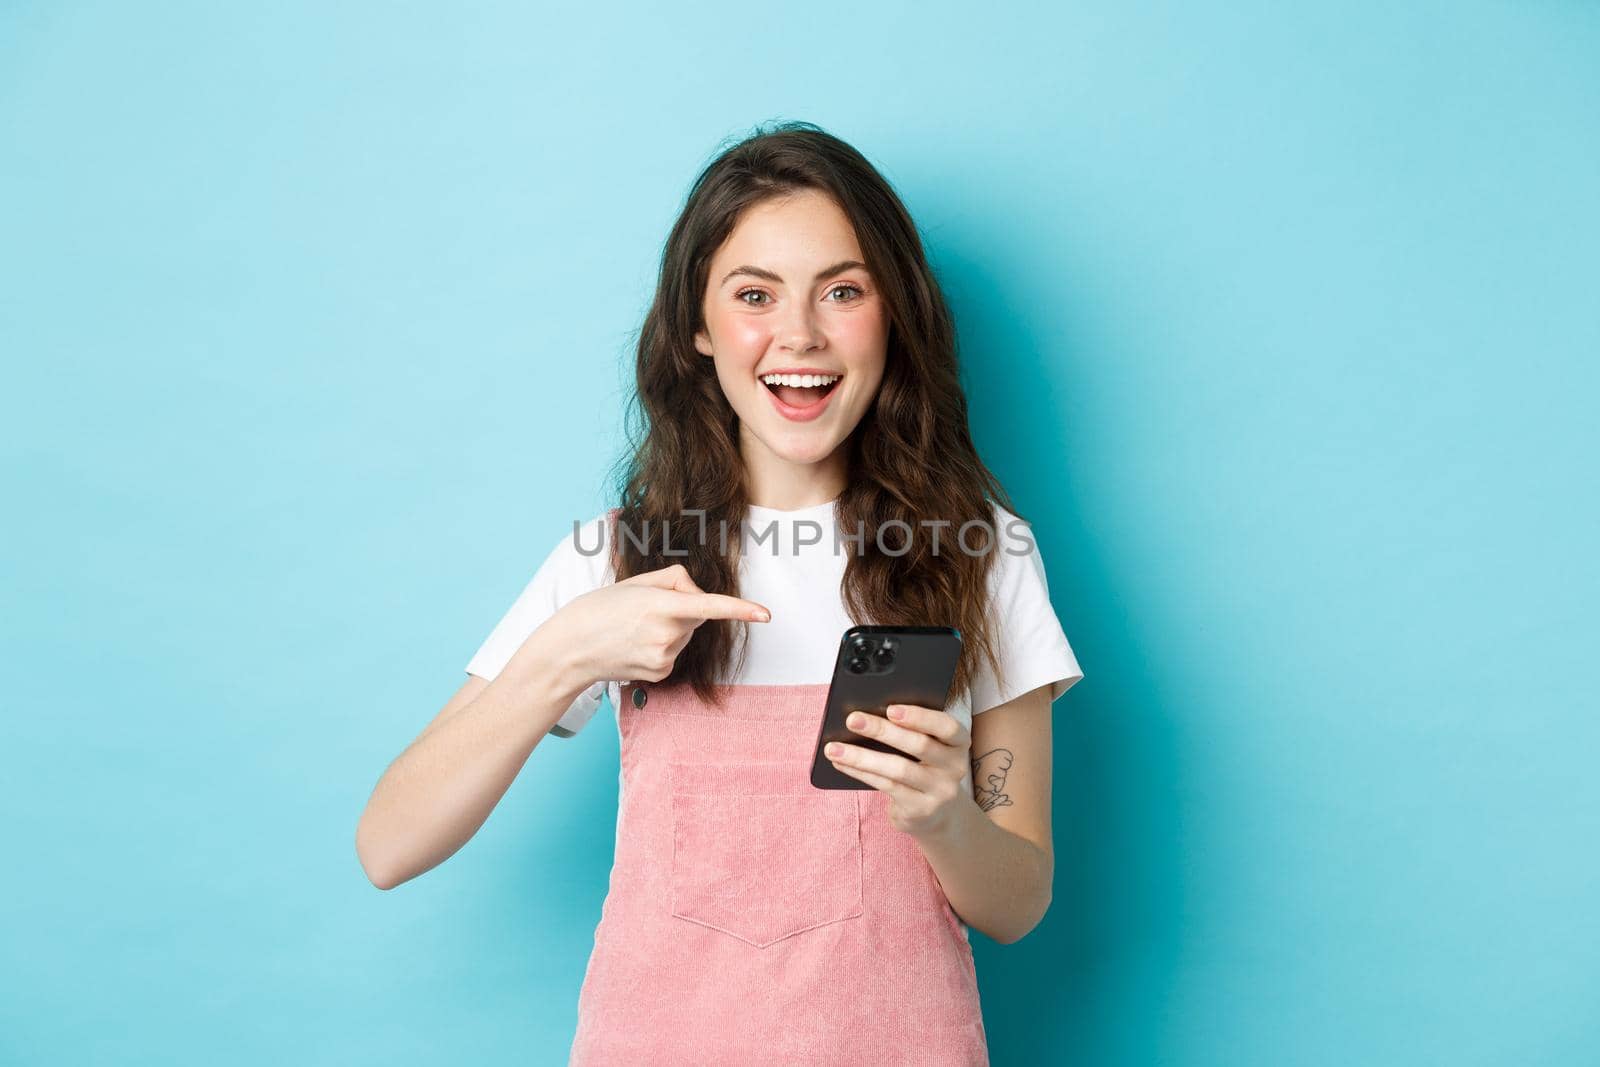 Portrait of cute and cheerful girl pointing finger at her phone, using smartphone shopping app, standing over blue background.